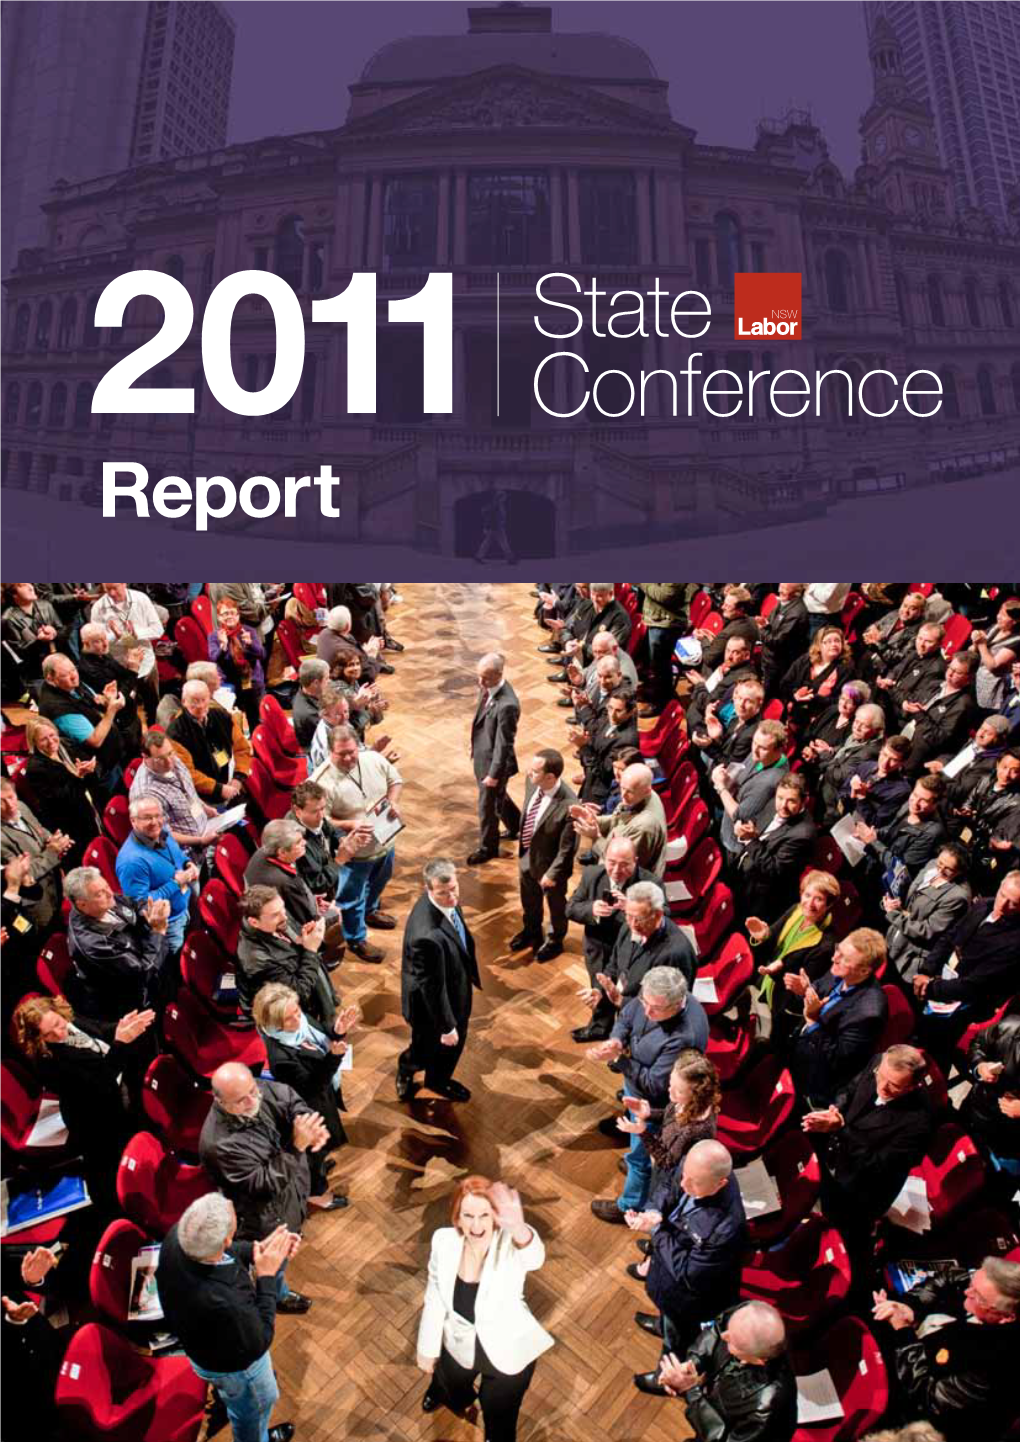 State Conference Report Contents